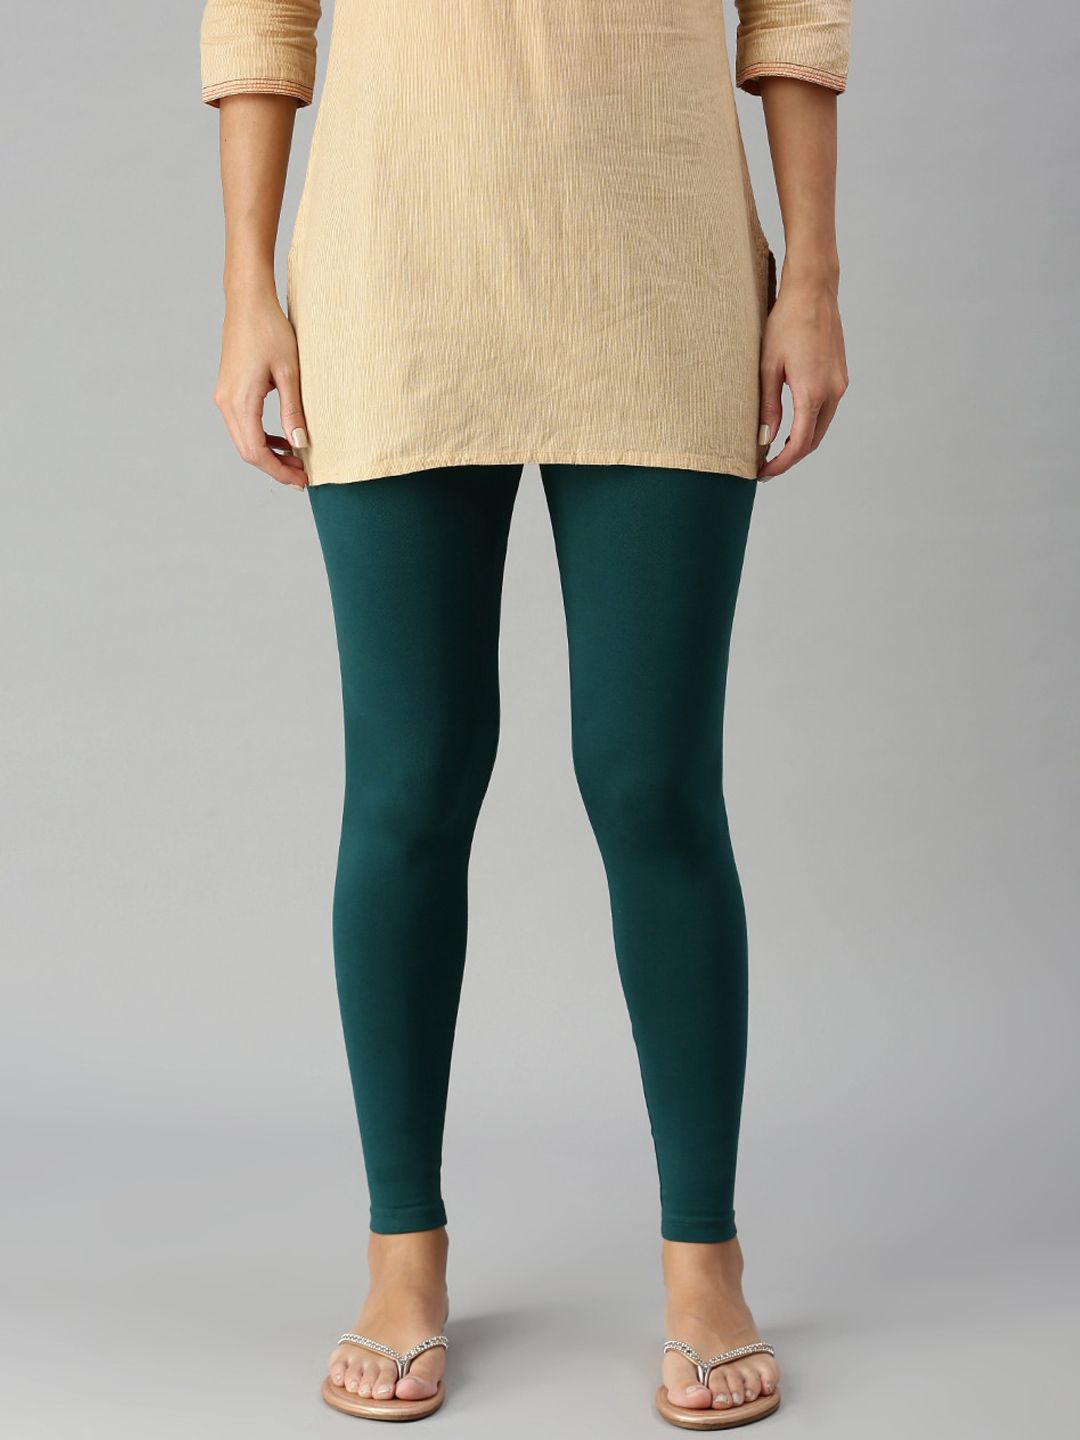 De Moza Women Green Solid Ankle-Length Leggings Price in India